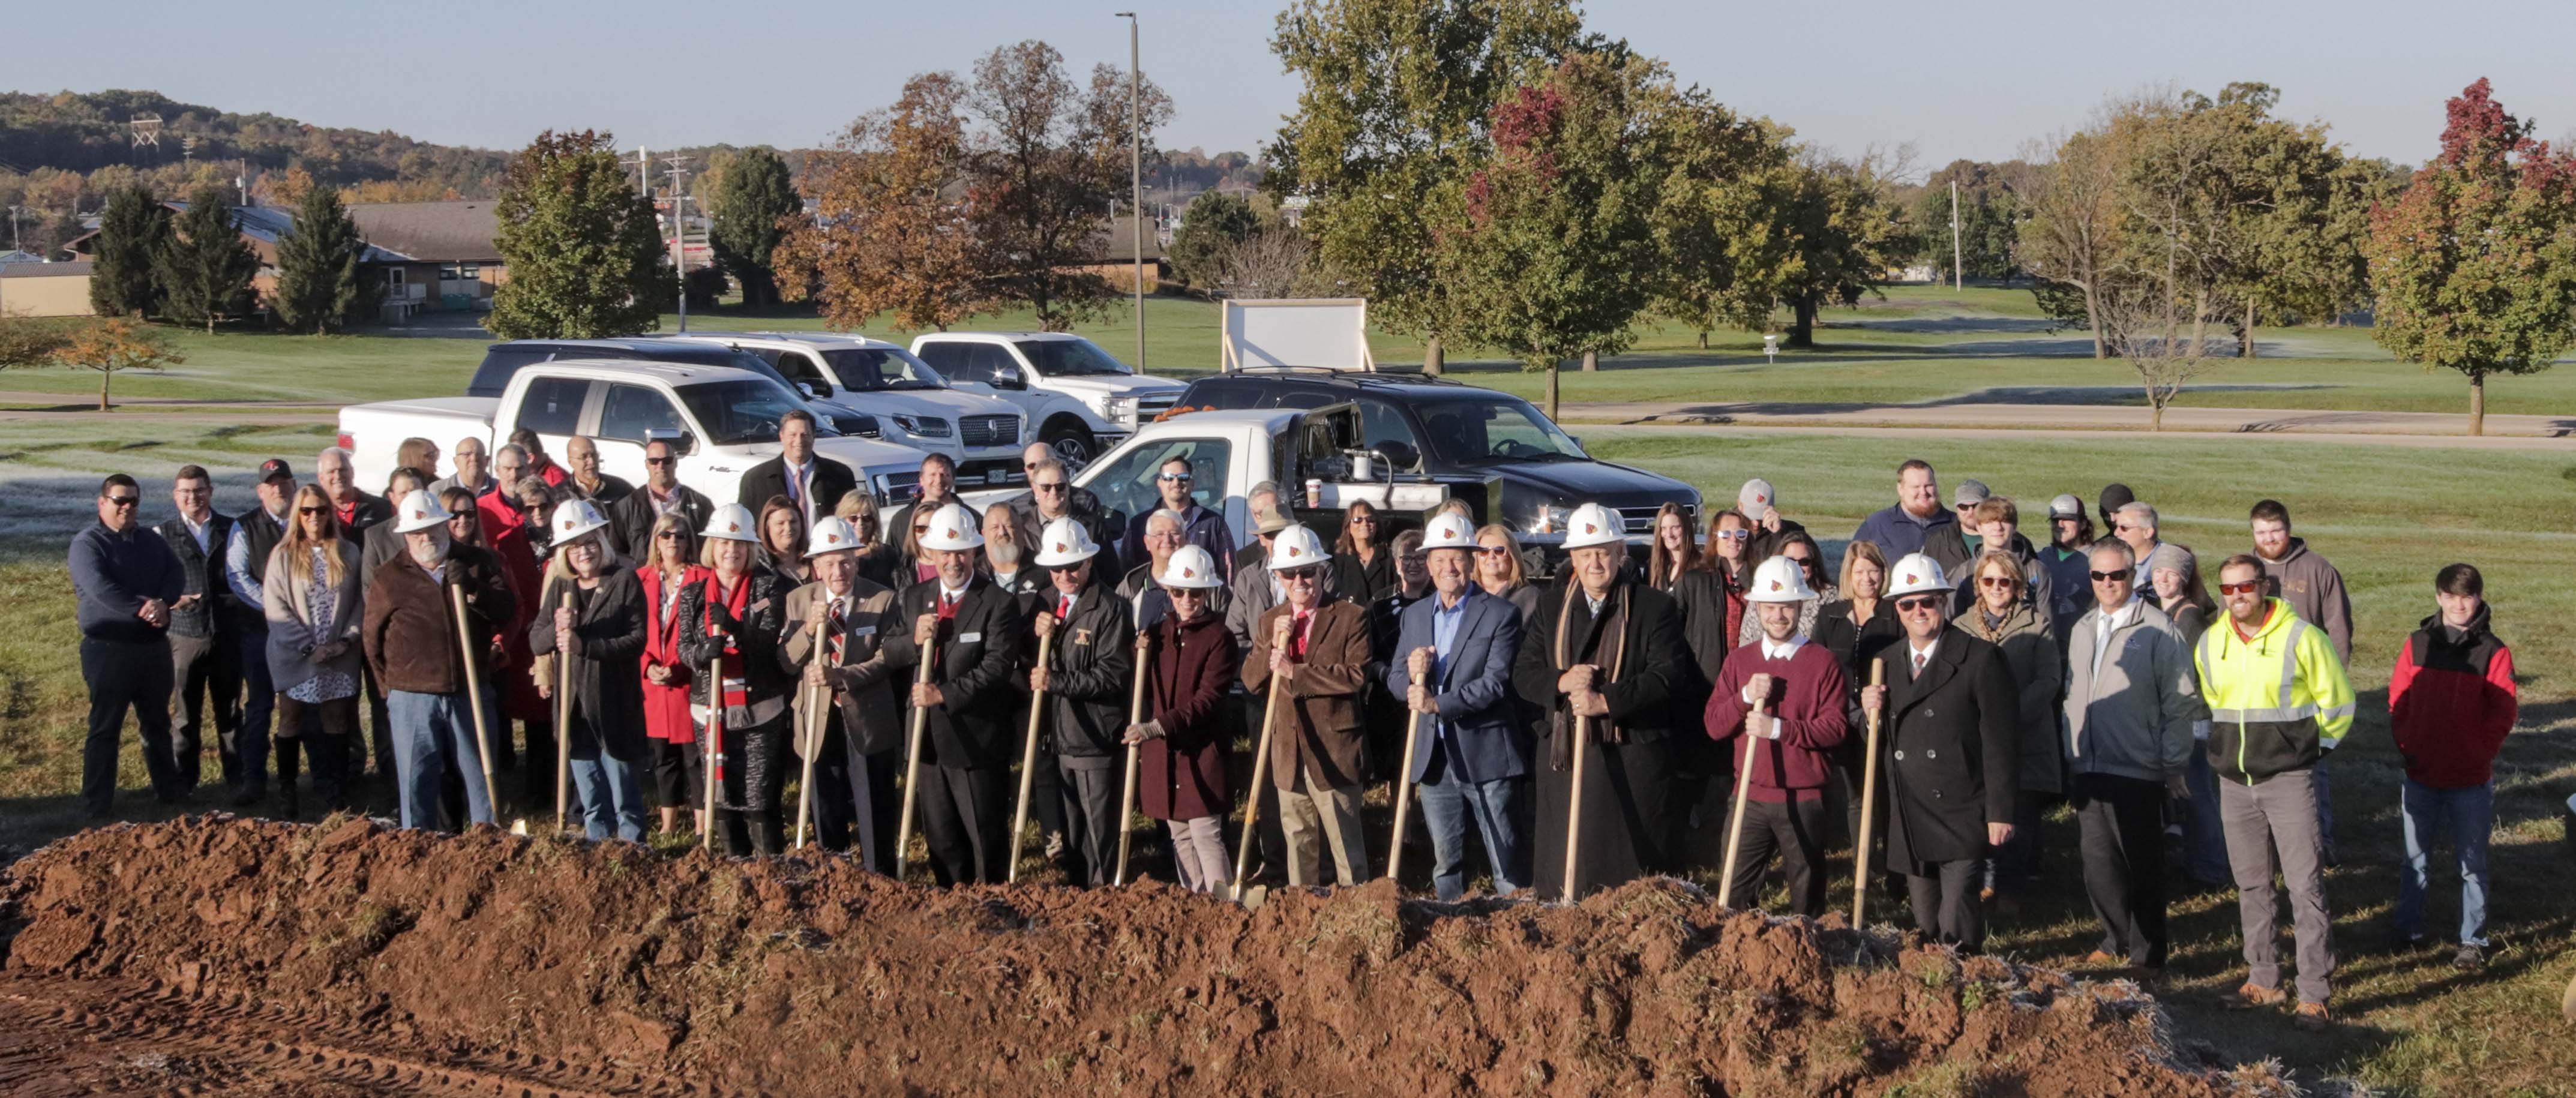 Photo of large group of people at groundbreaking ceremony